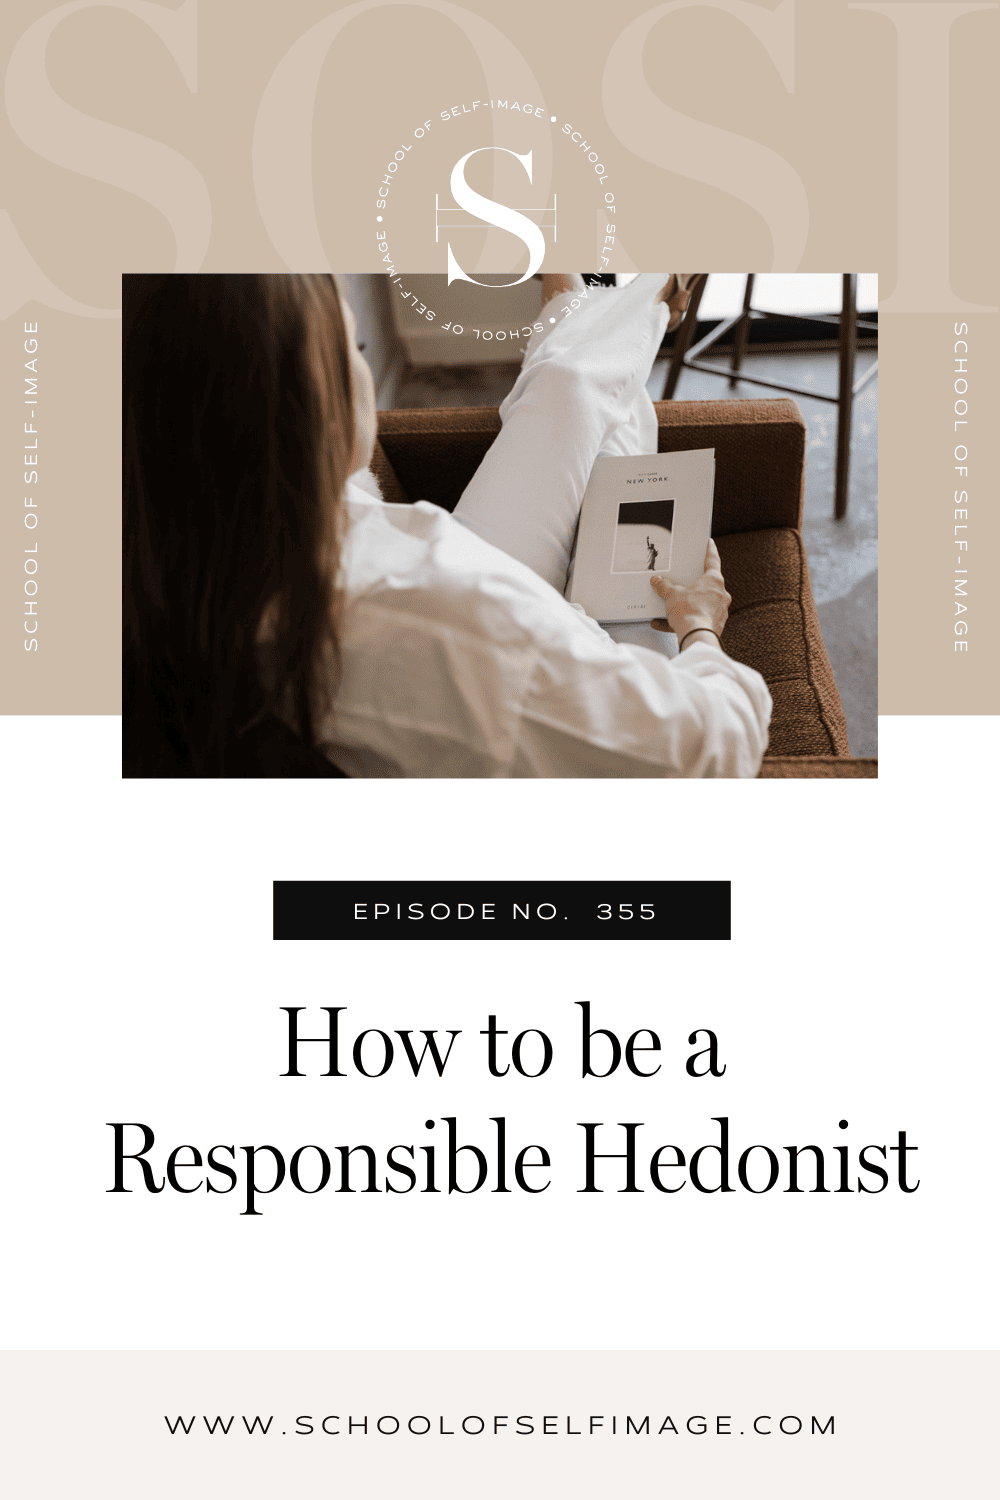 How to be a Responsible Hedonist